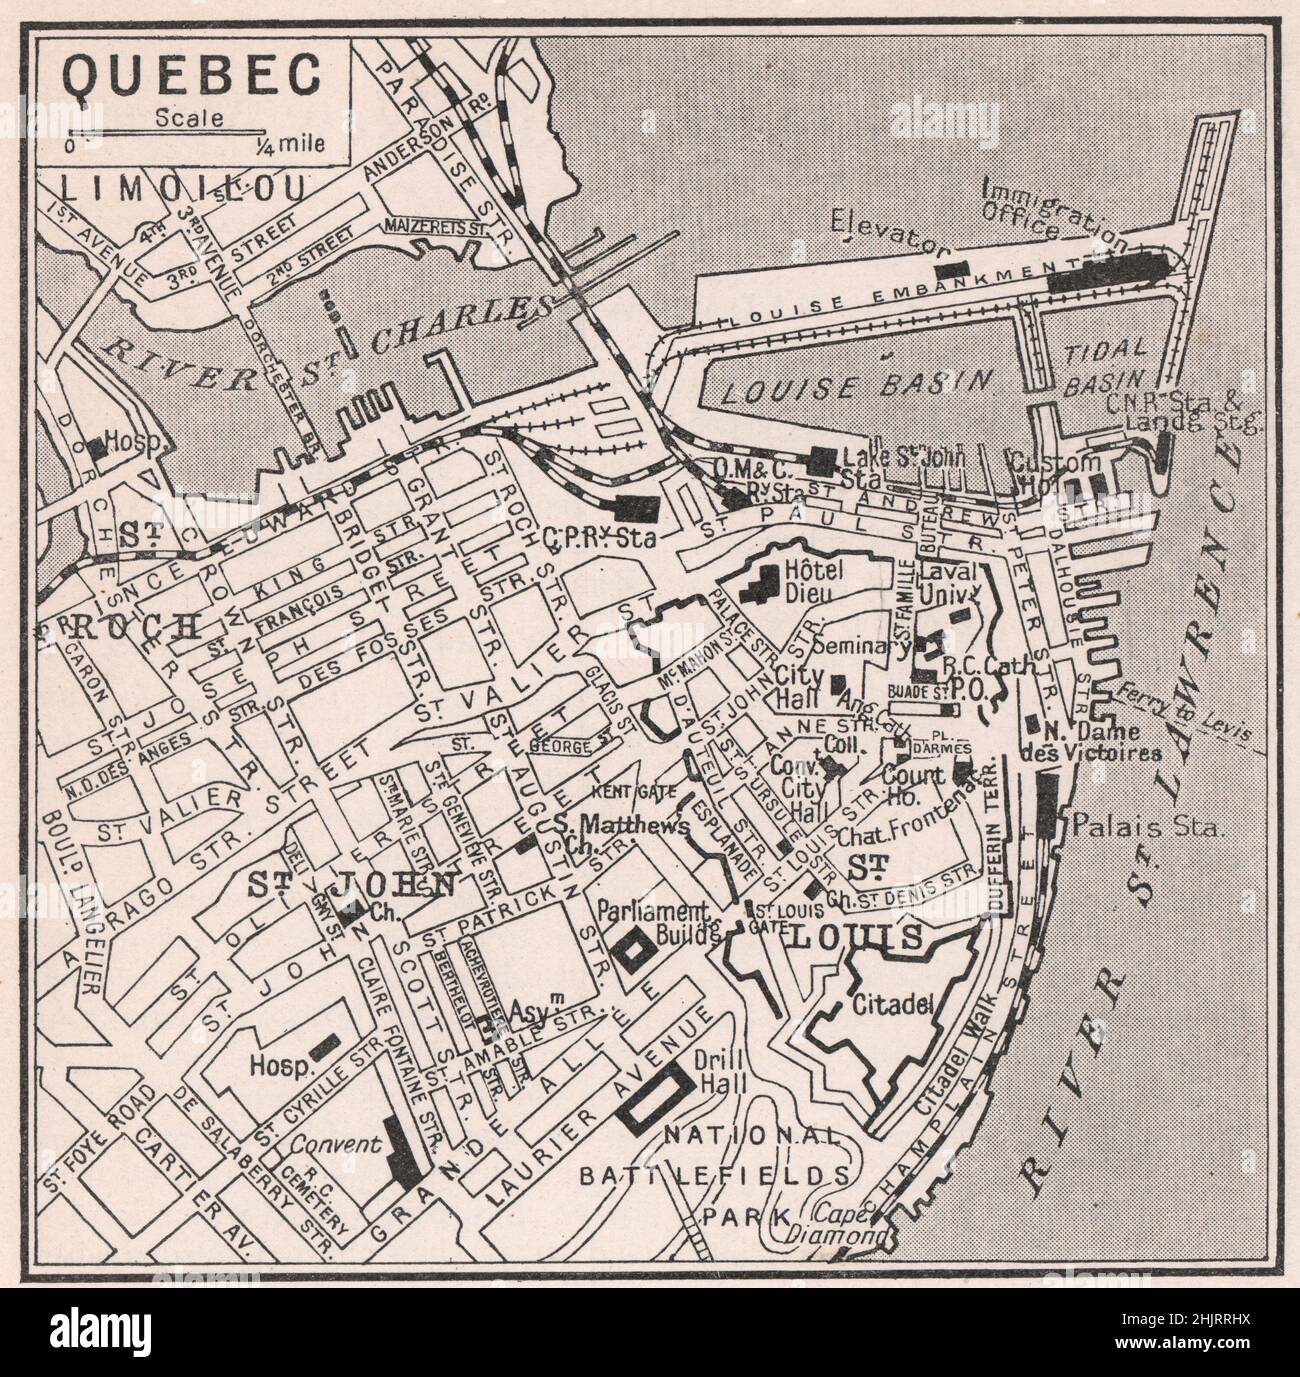 Quebec perched upon its historic heights. Canada. Quebec City (1923 map) Stock Photo